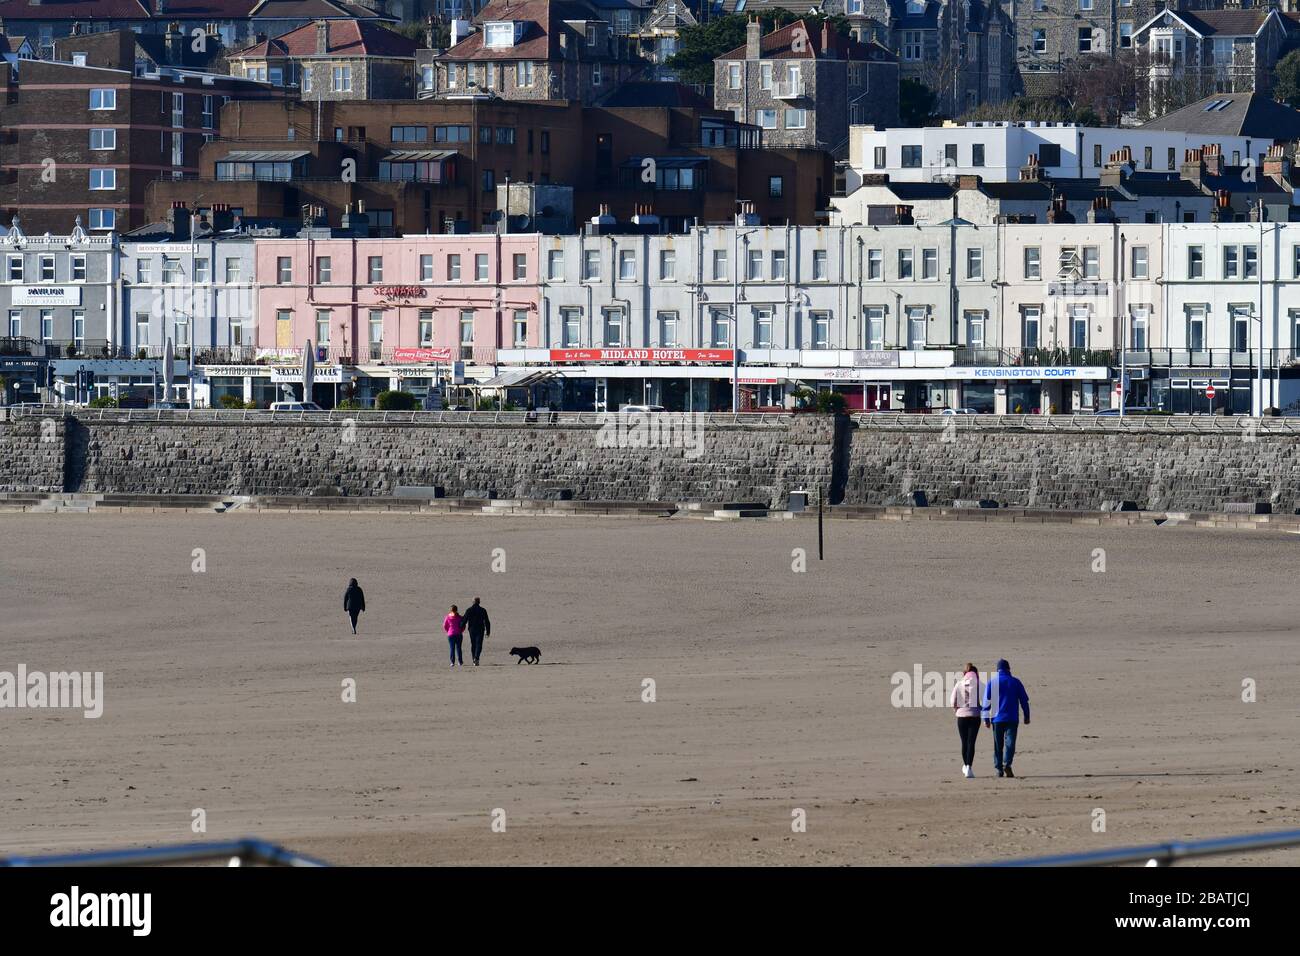 Weston-Super-Mare, North Somerset, UK. 29th Mar, 2020. UK covid-19 virus lockdown.Walkers on the beach .World Famous Weston Super Mare seafront with new Government Guide Lines Iminent. Picture credit Robert Timoney/Alamy/Live/News Stock Photo